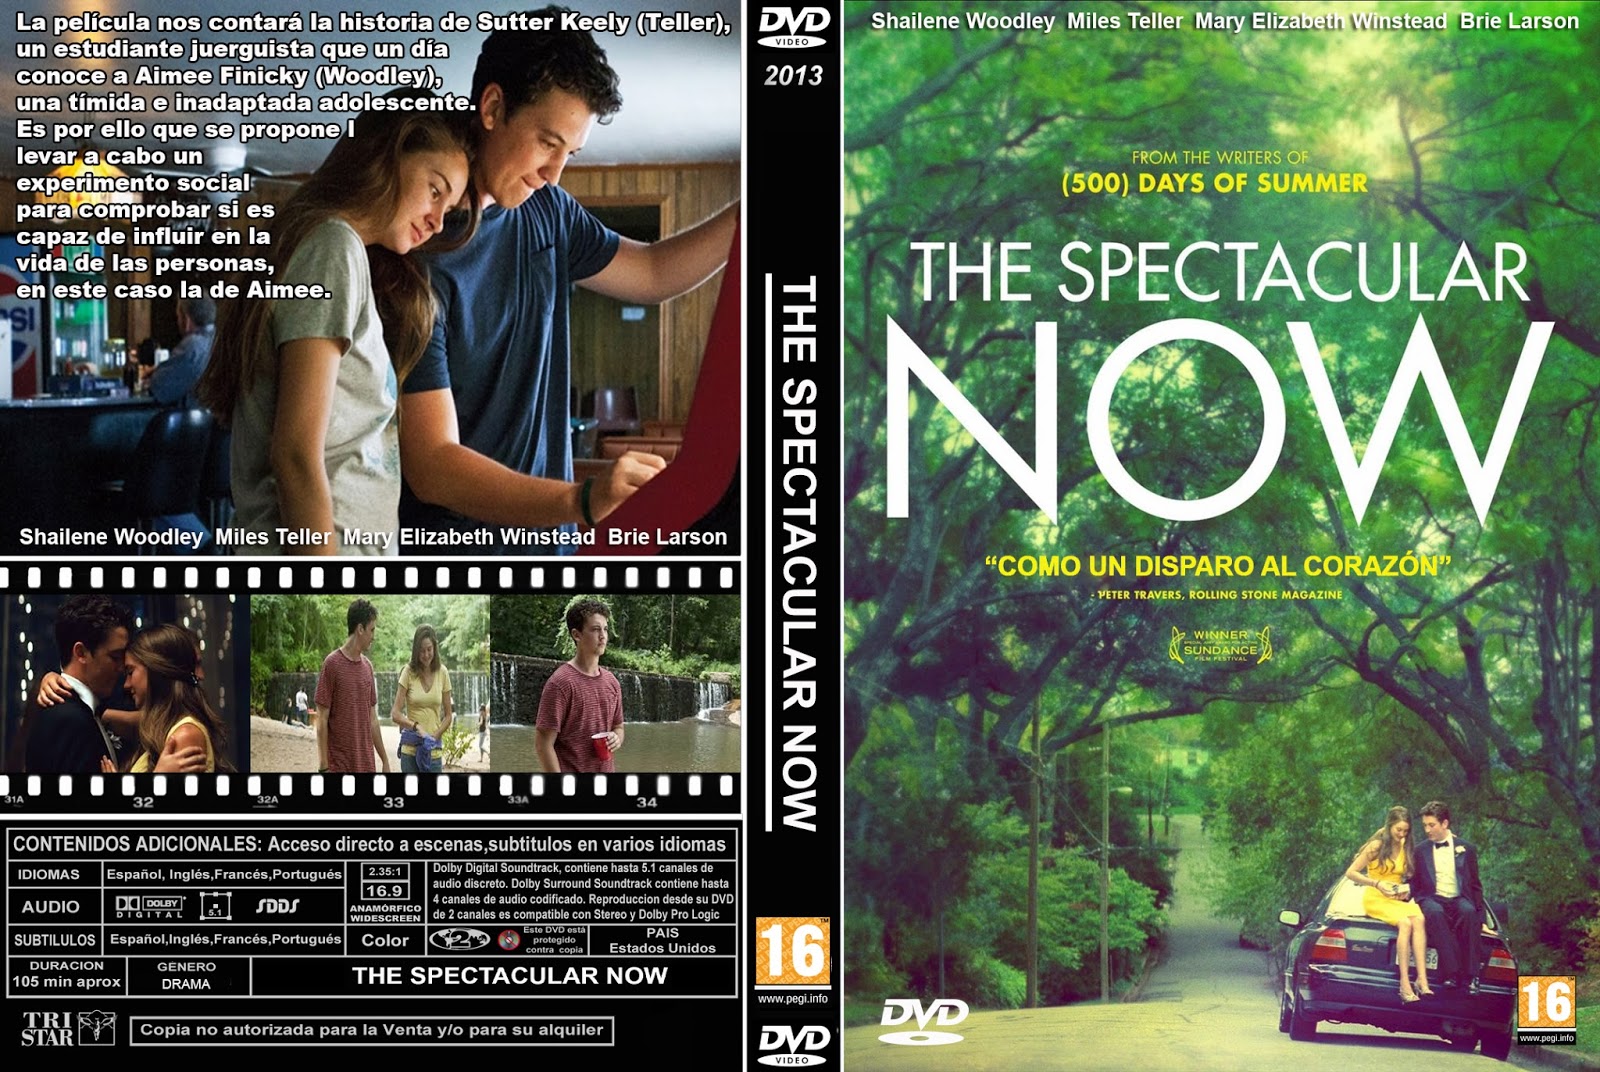 THE SPECTACULAR NOW COVER 2013 Spectacular Now Image, Picture, Photo, Icon and Wallpaper: Ravepad place to rave about anything and everything!